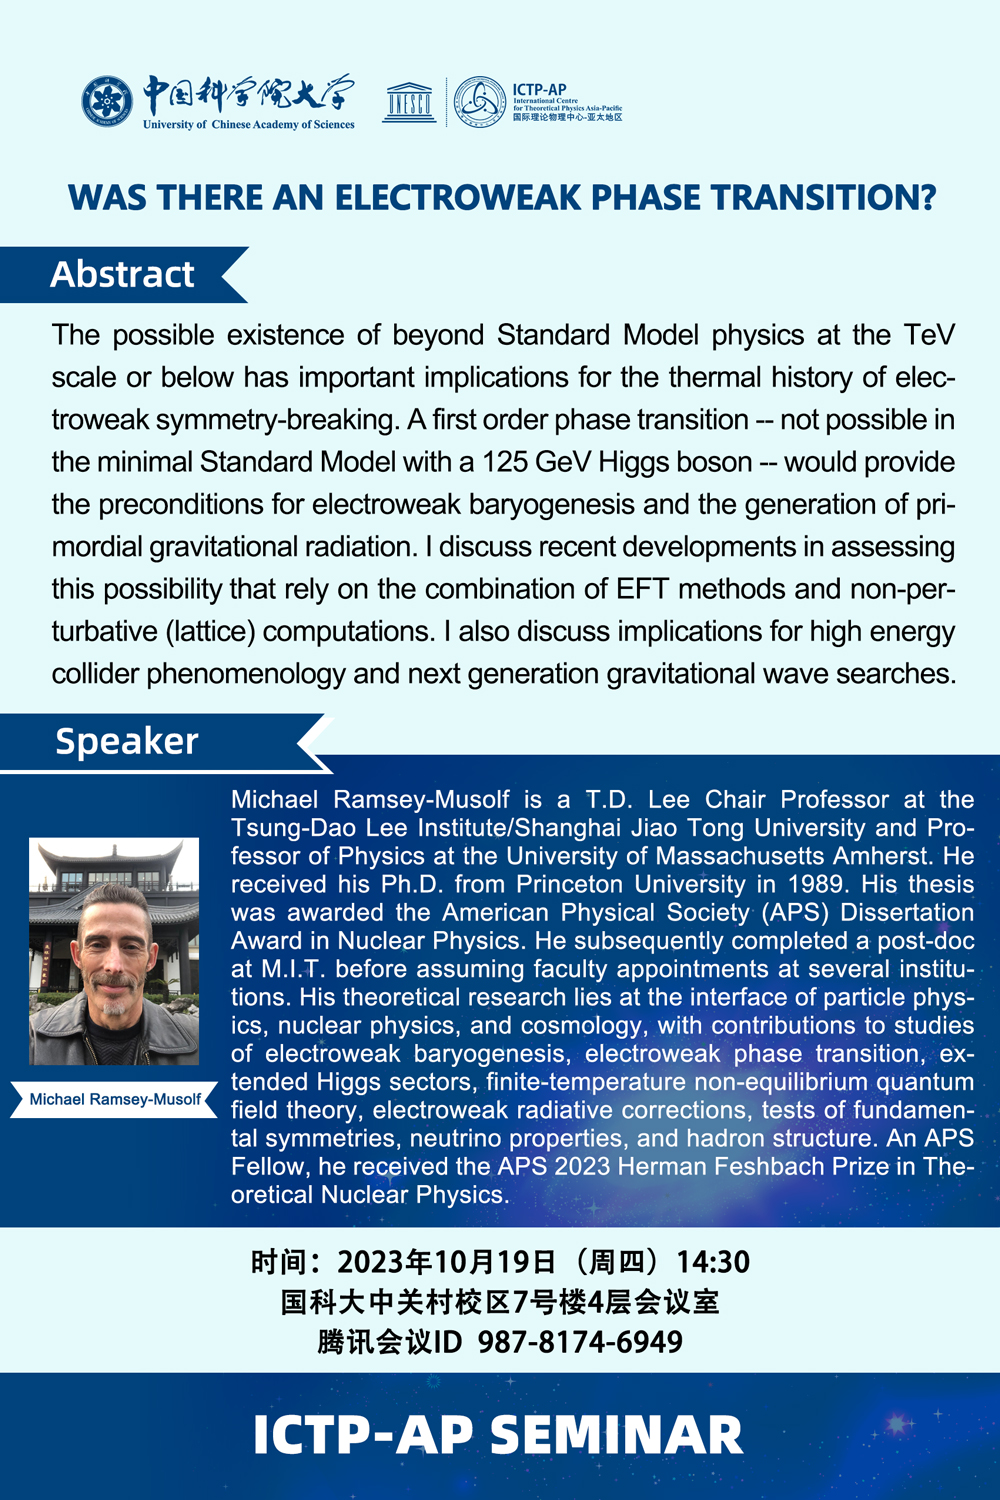 ICTP-AP Seminar: “Was There an Electroweak Phase Transition?”